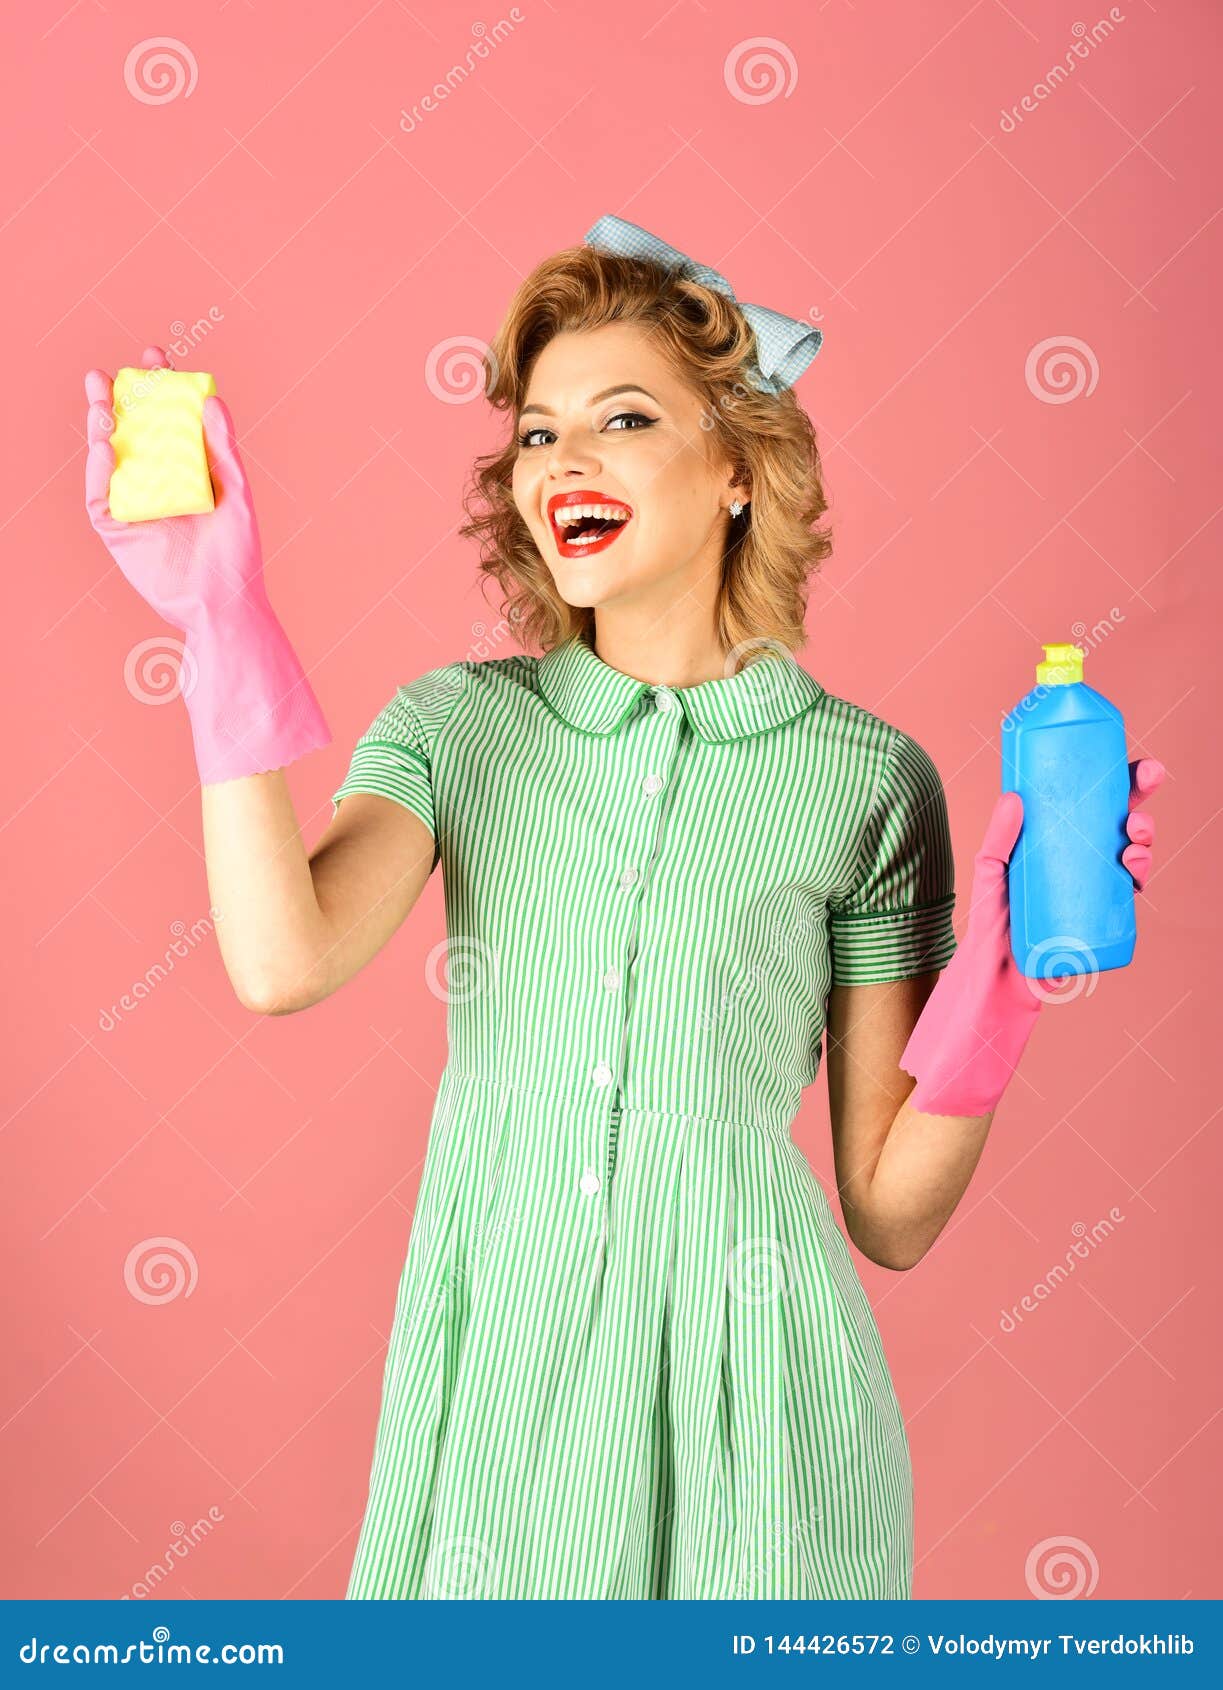 Retro Cleaning Lady